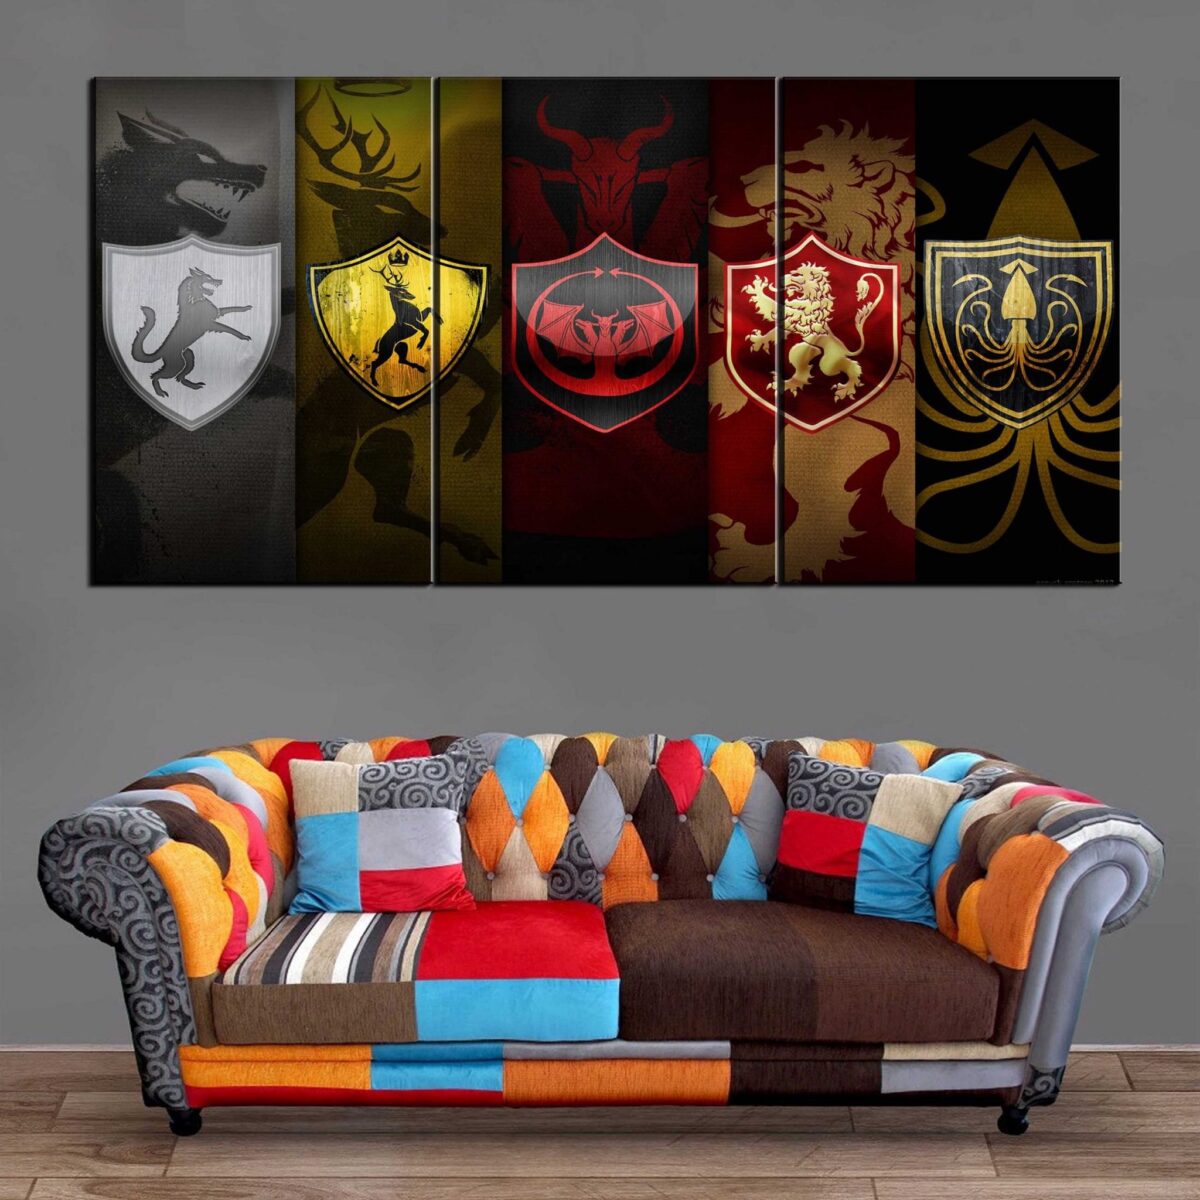 Décoration Murale Games Of Thrones Maisons